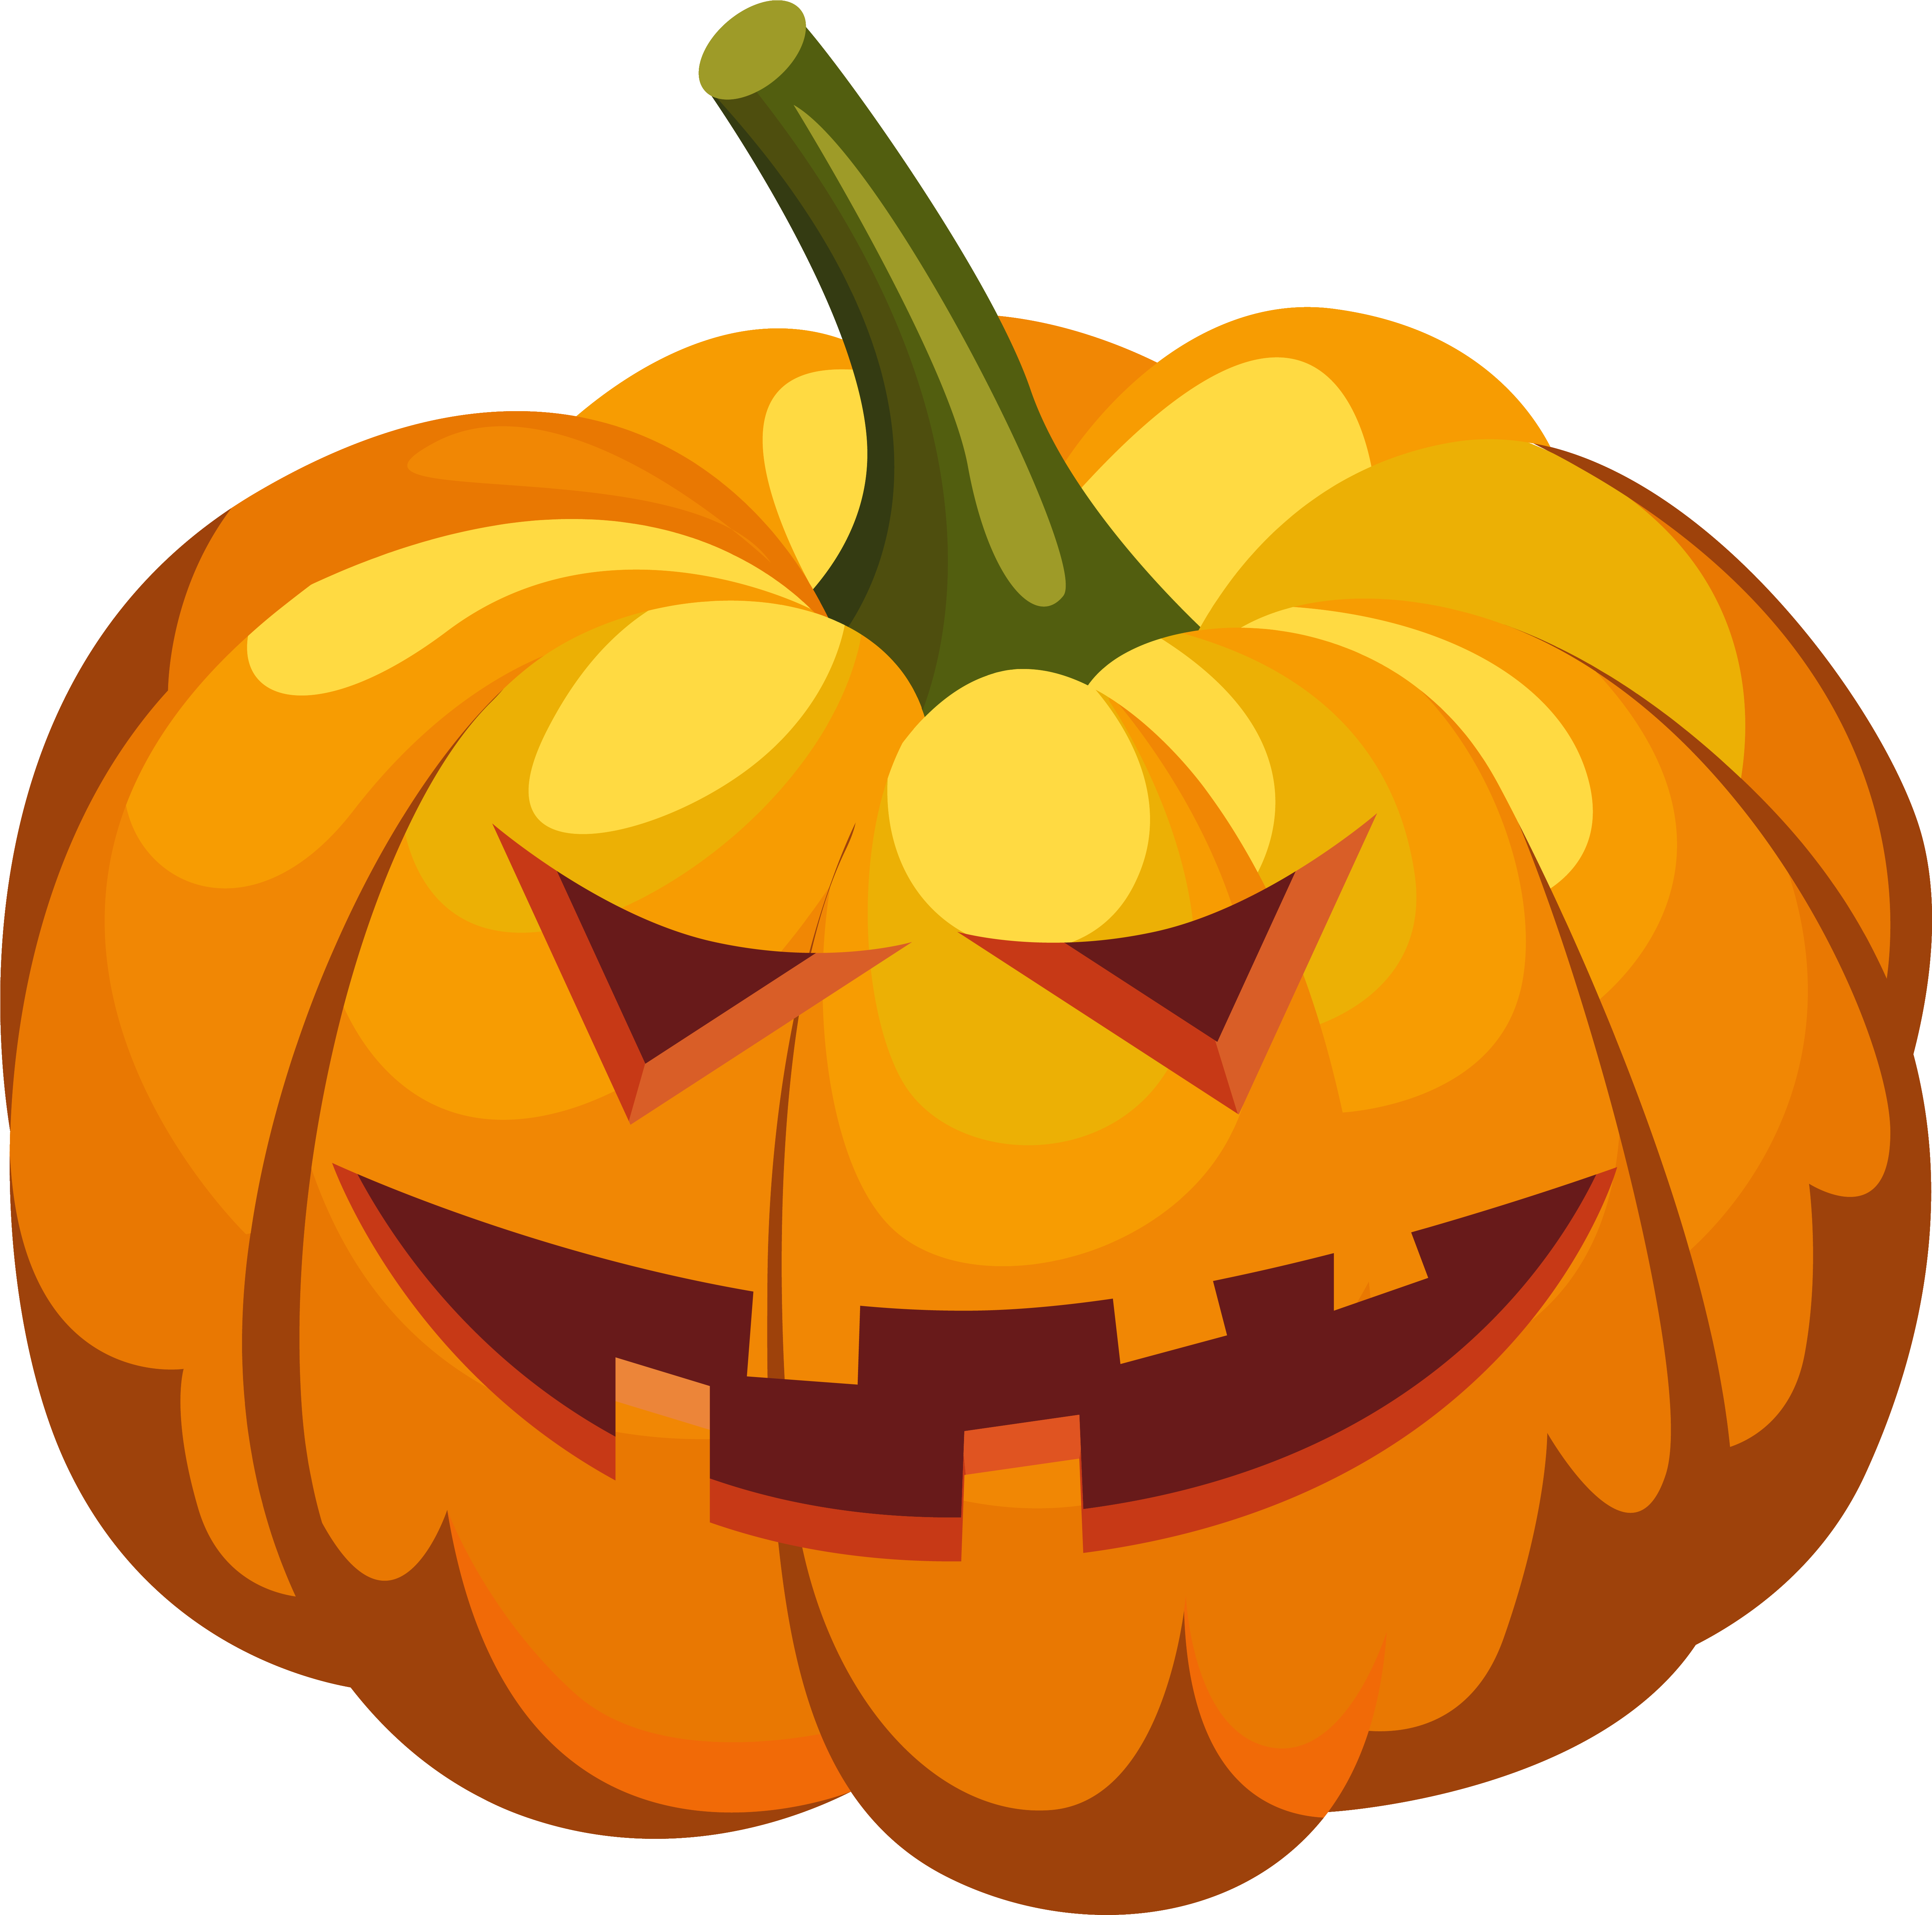 Halloween Ornaments Download Free PNG